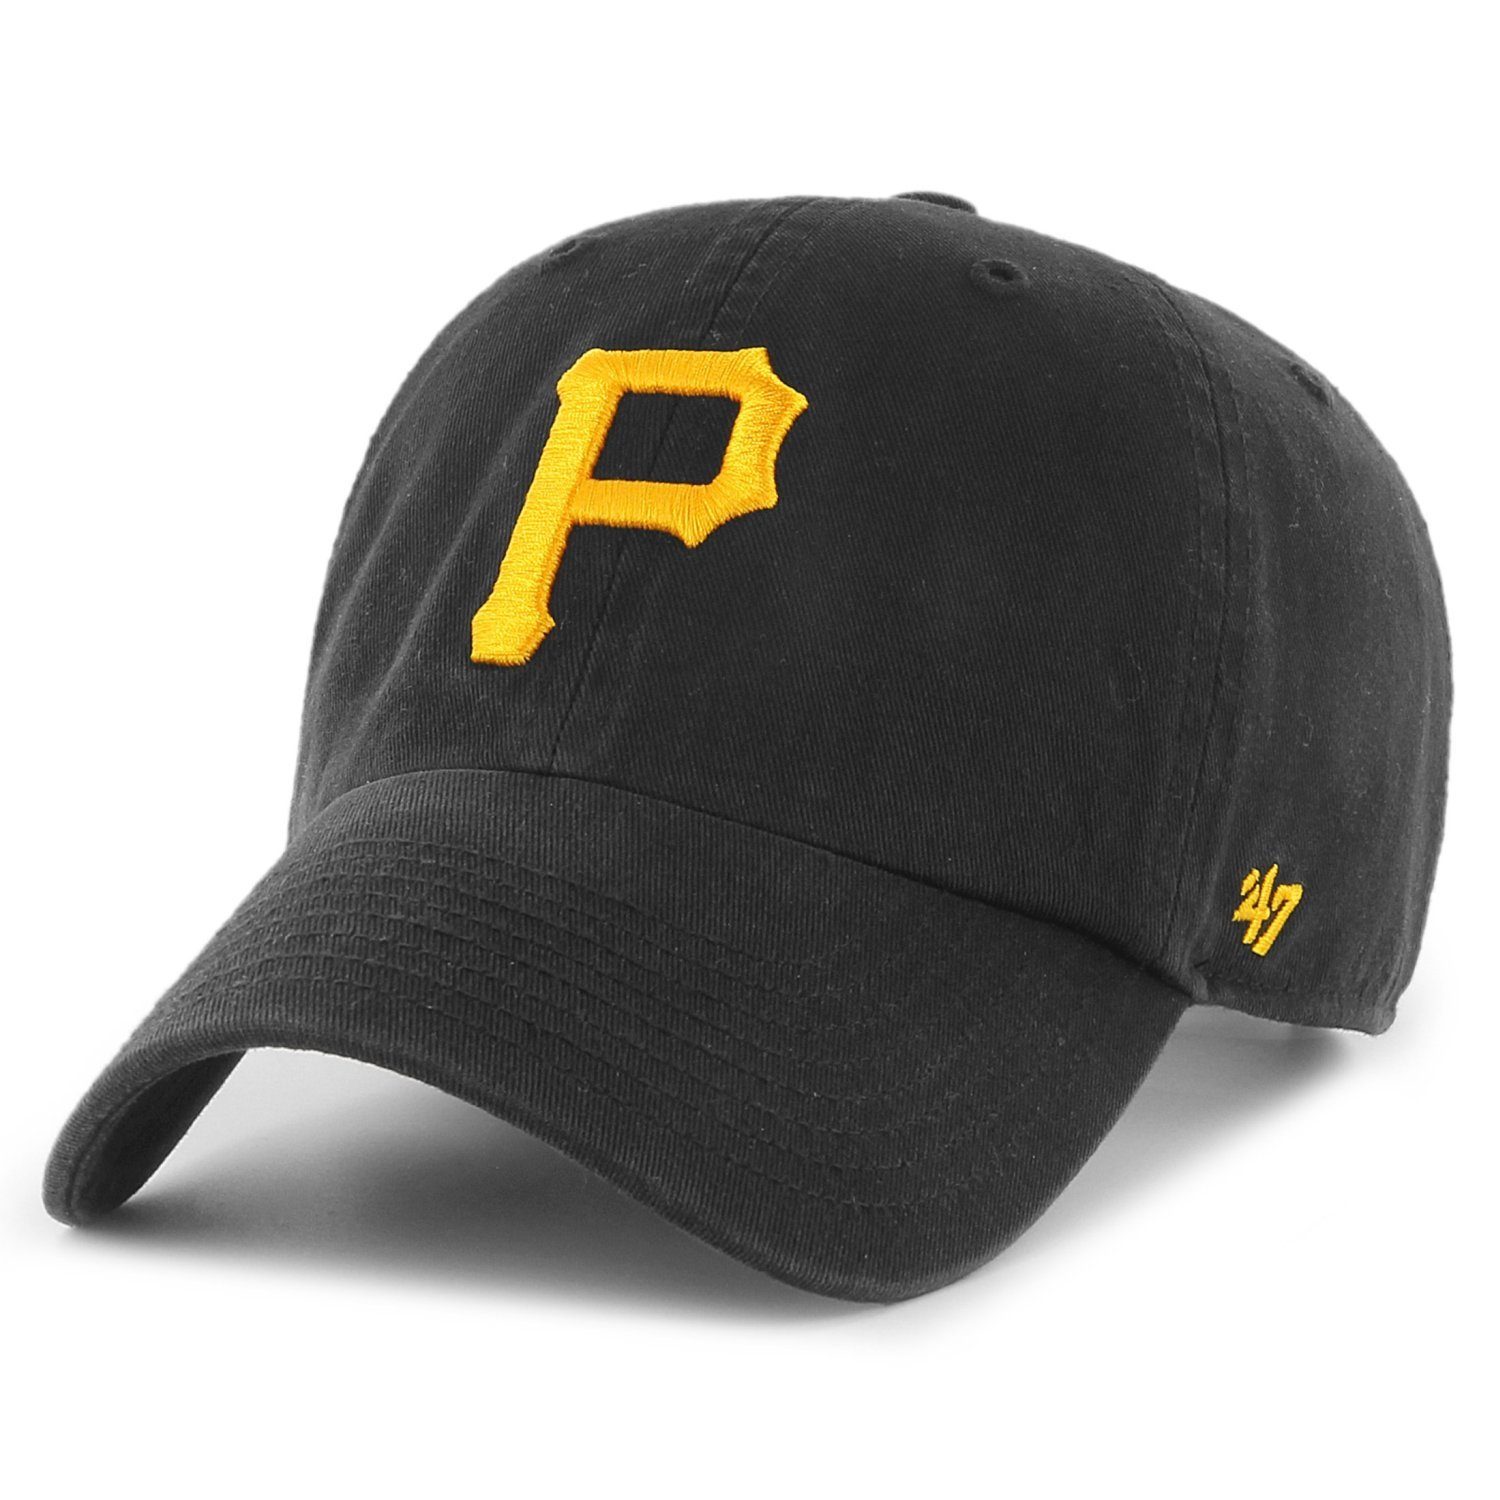 '47 Brand Trucker Cap Relaxed Fit MLB Pittsburgh Pirates | Trucker Caps